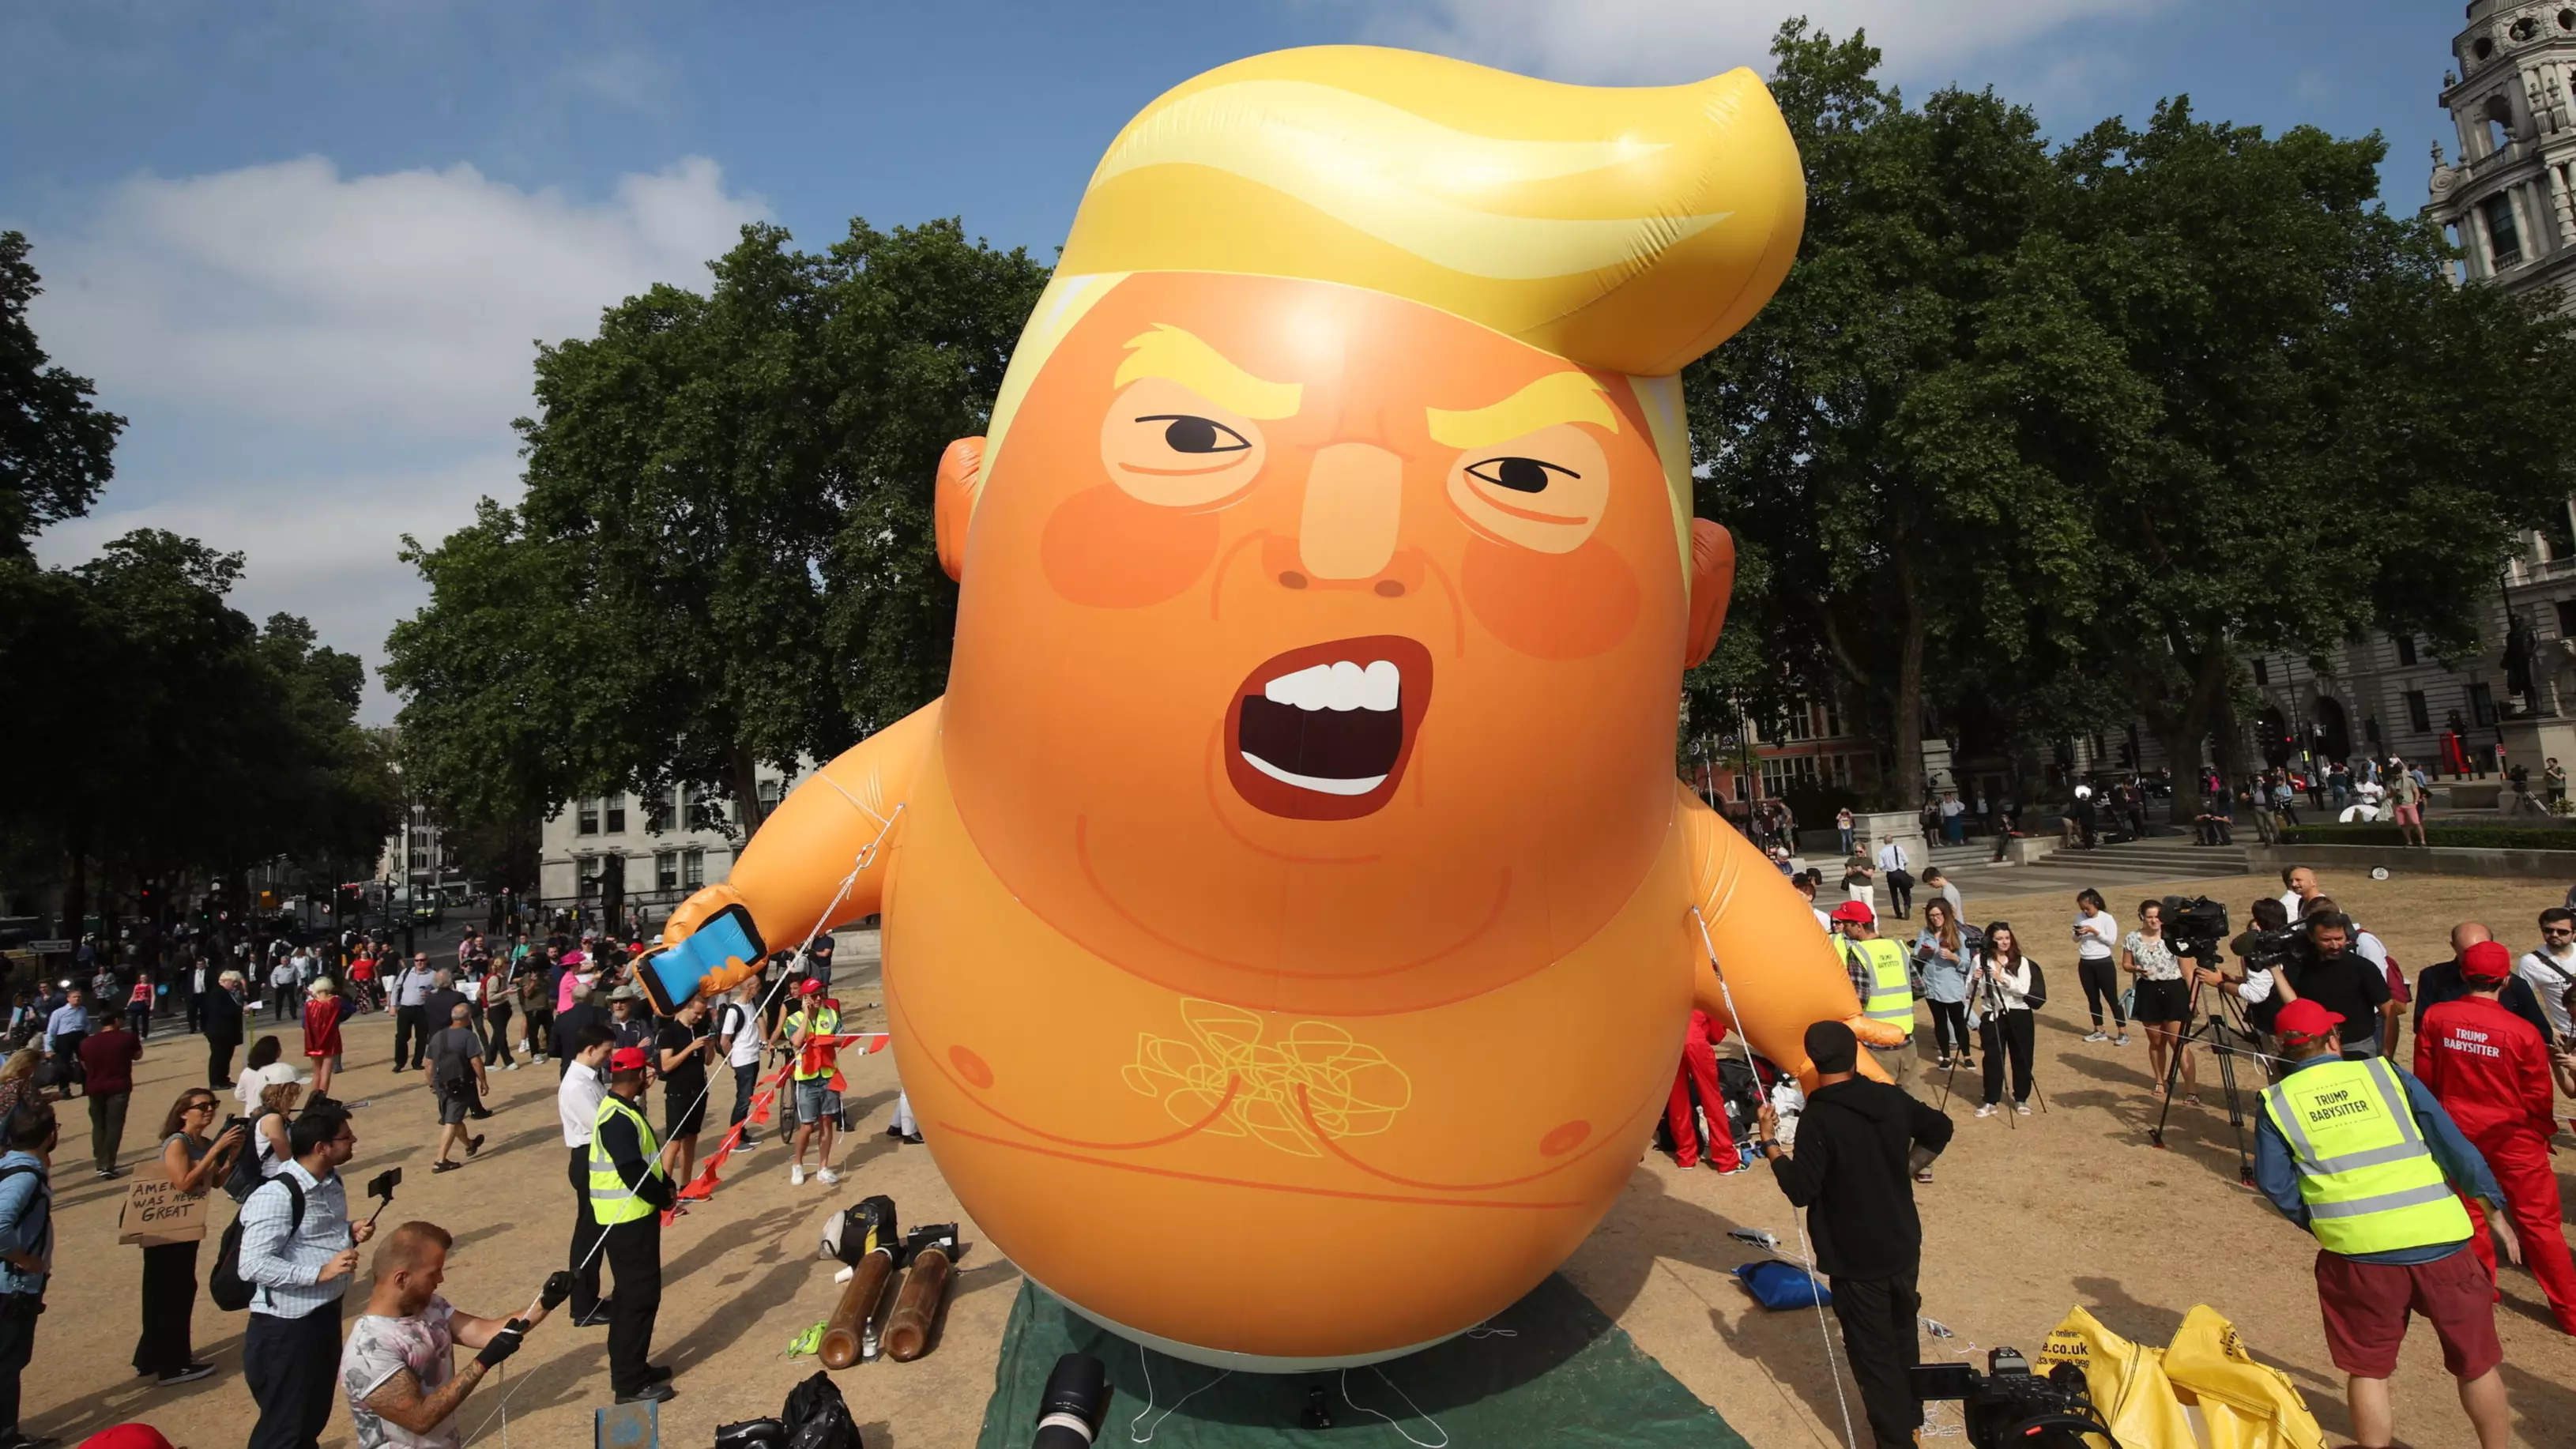 Museum Of London To Immortalise Baby Trump Balloon In Exhibition About Protest Art